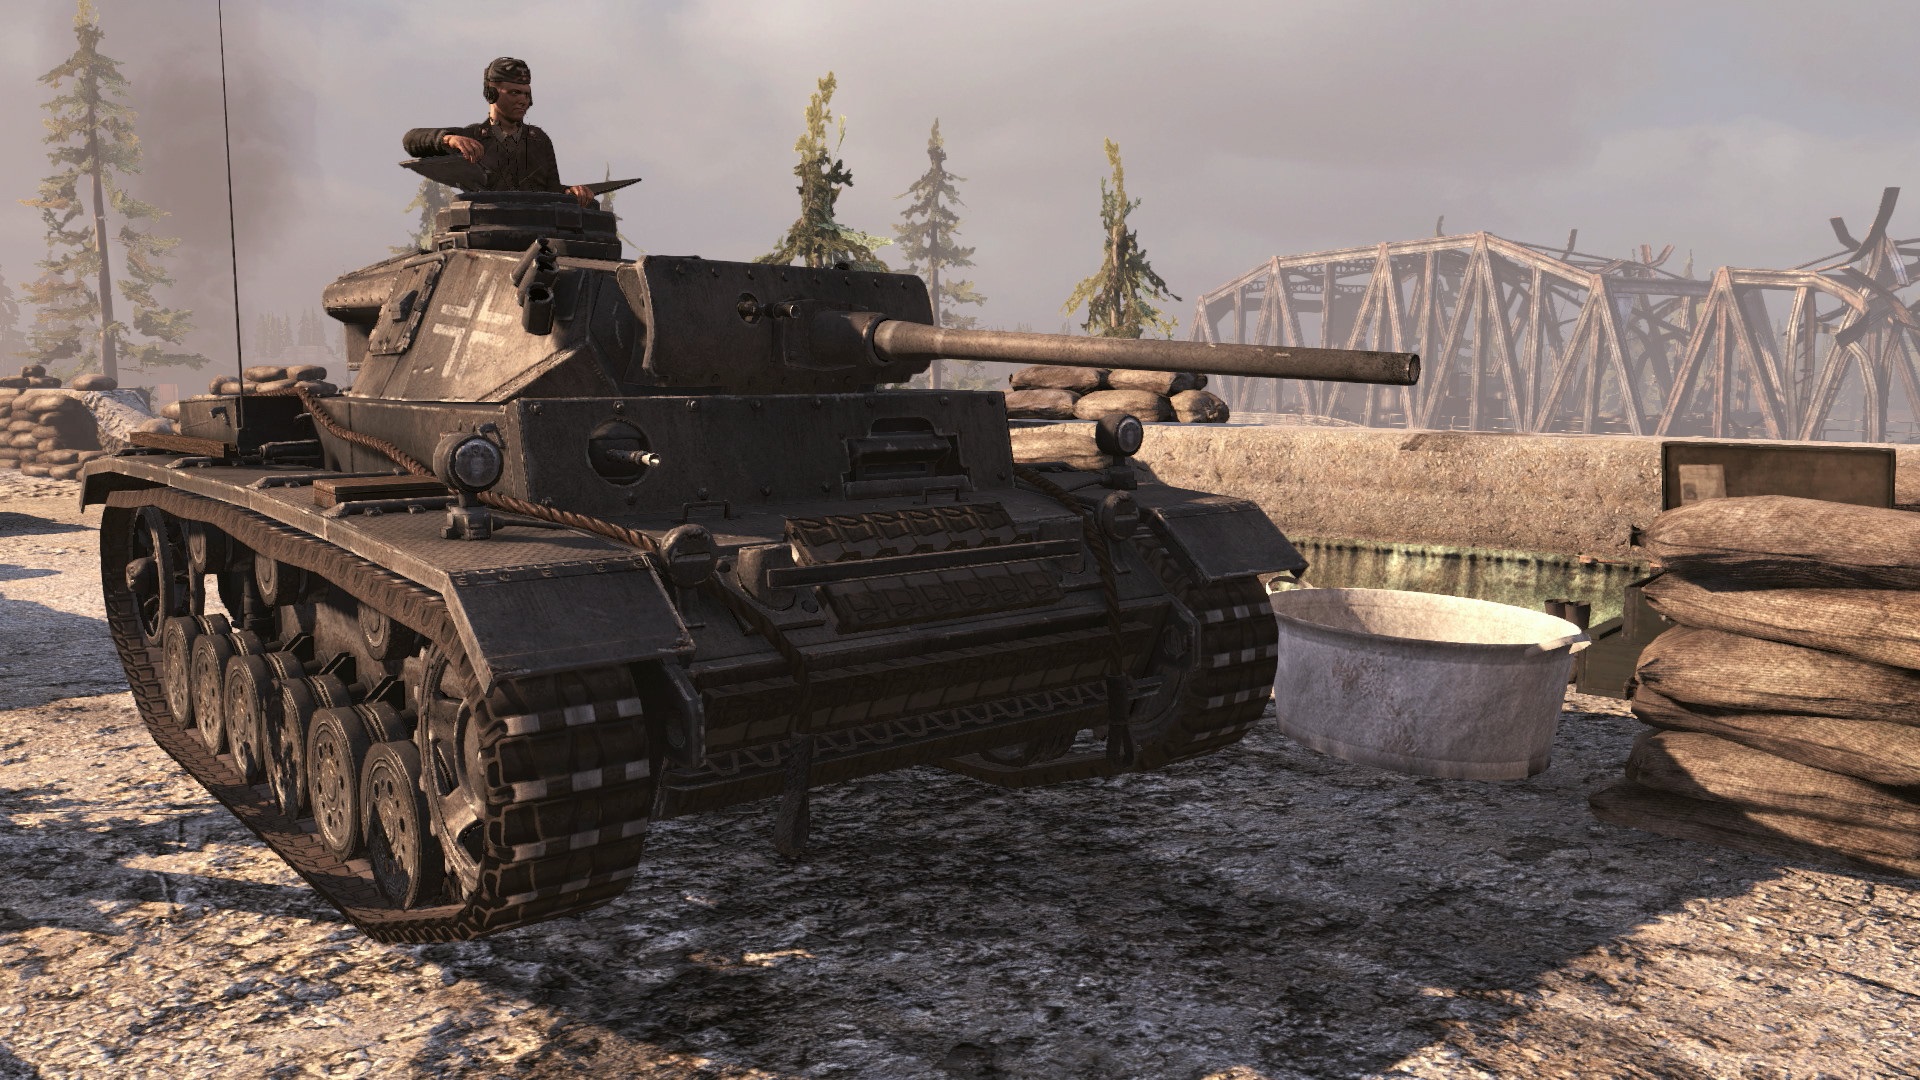 Best tank games: Red Orchestra 2. Image shows a soldier in a tank.